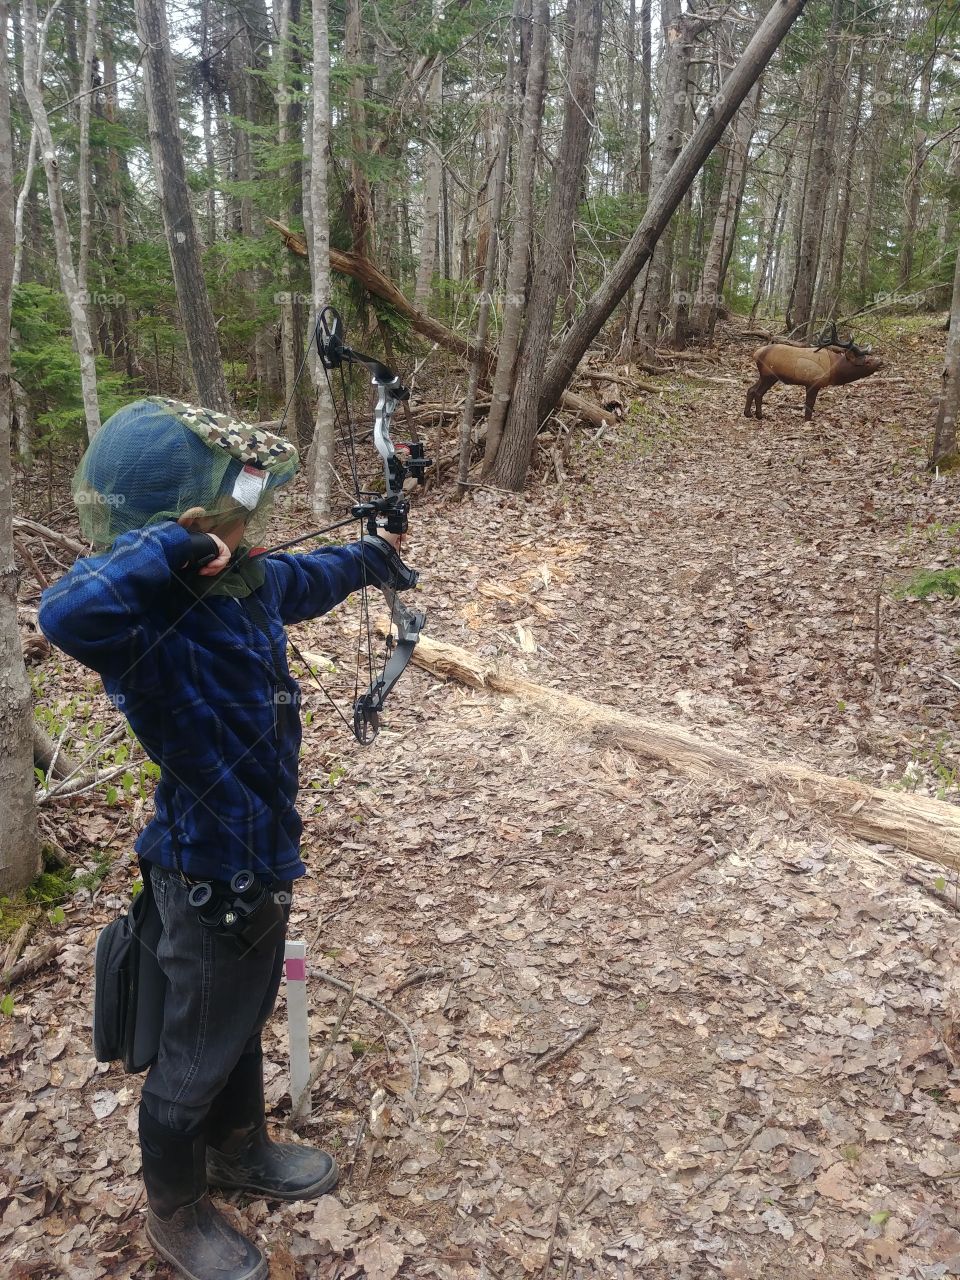 Little Archer practicing his technique in the woods!